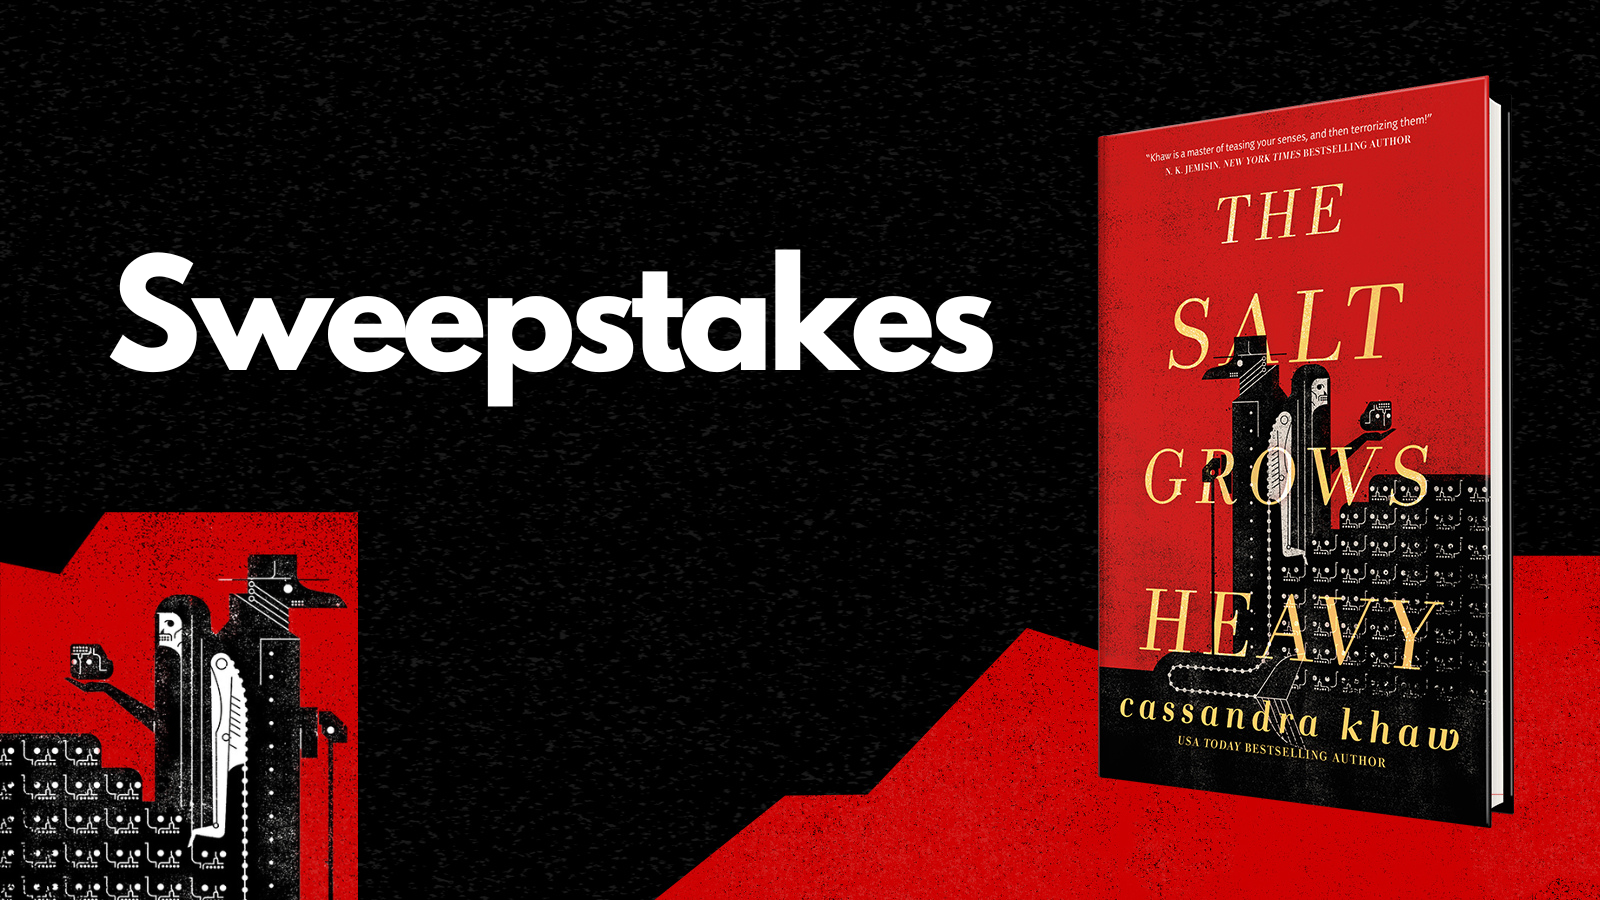 The Salt Grows Heavy Sweepstakes Rules - 471